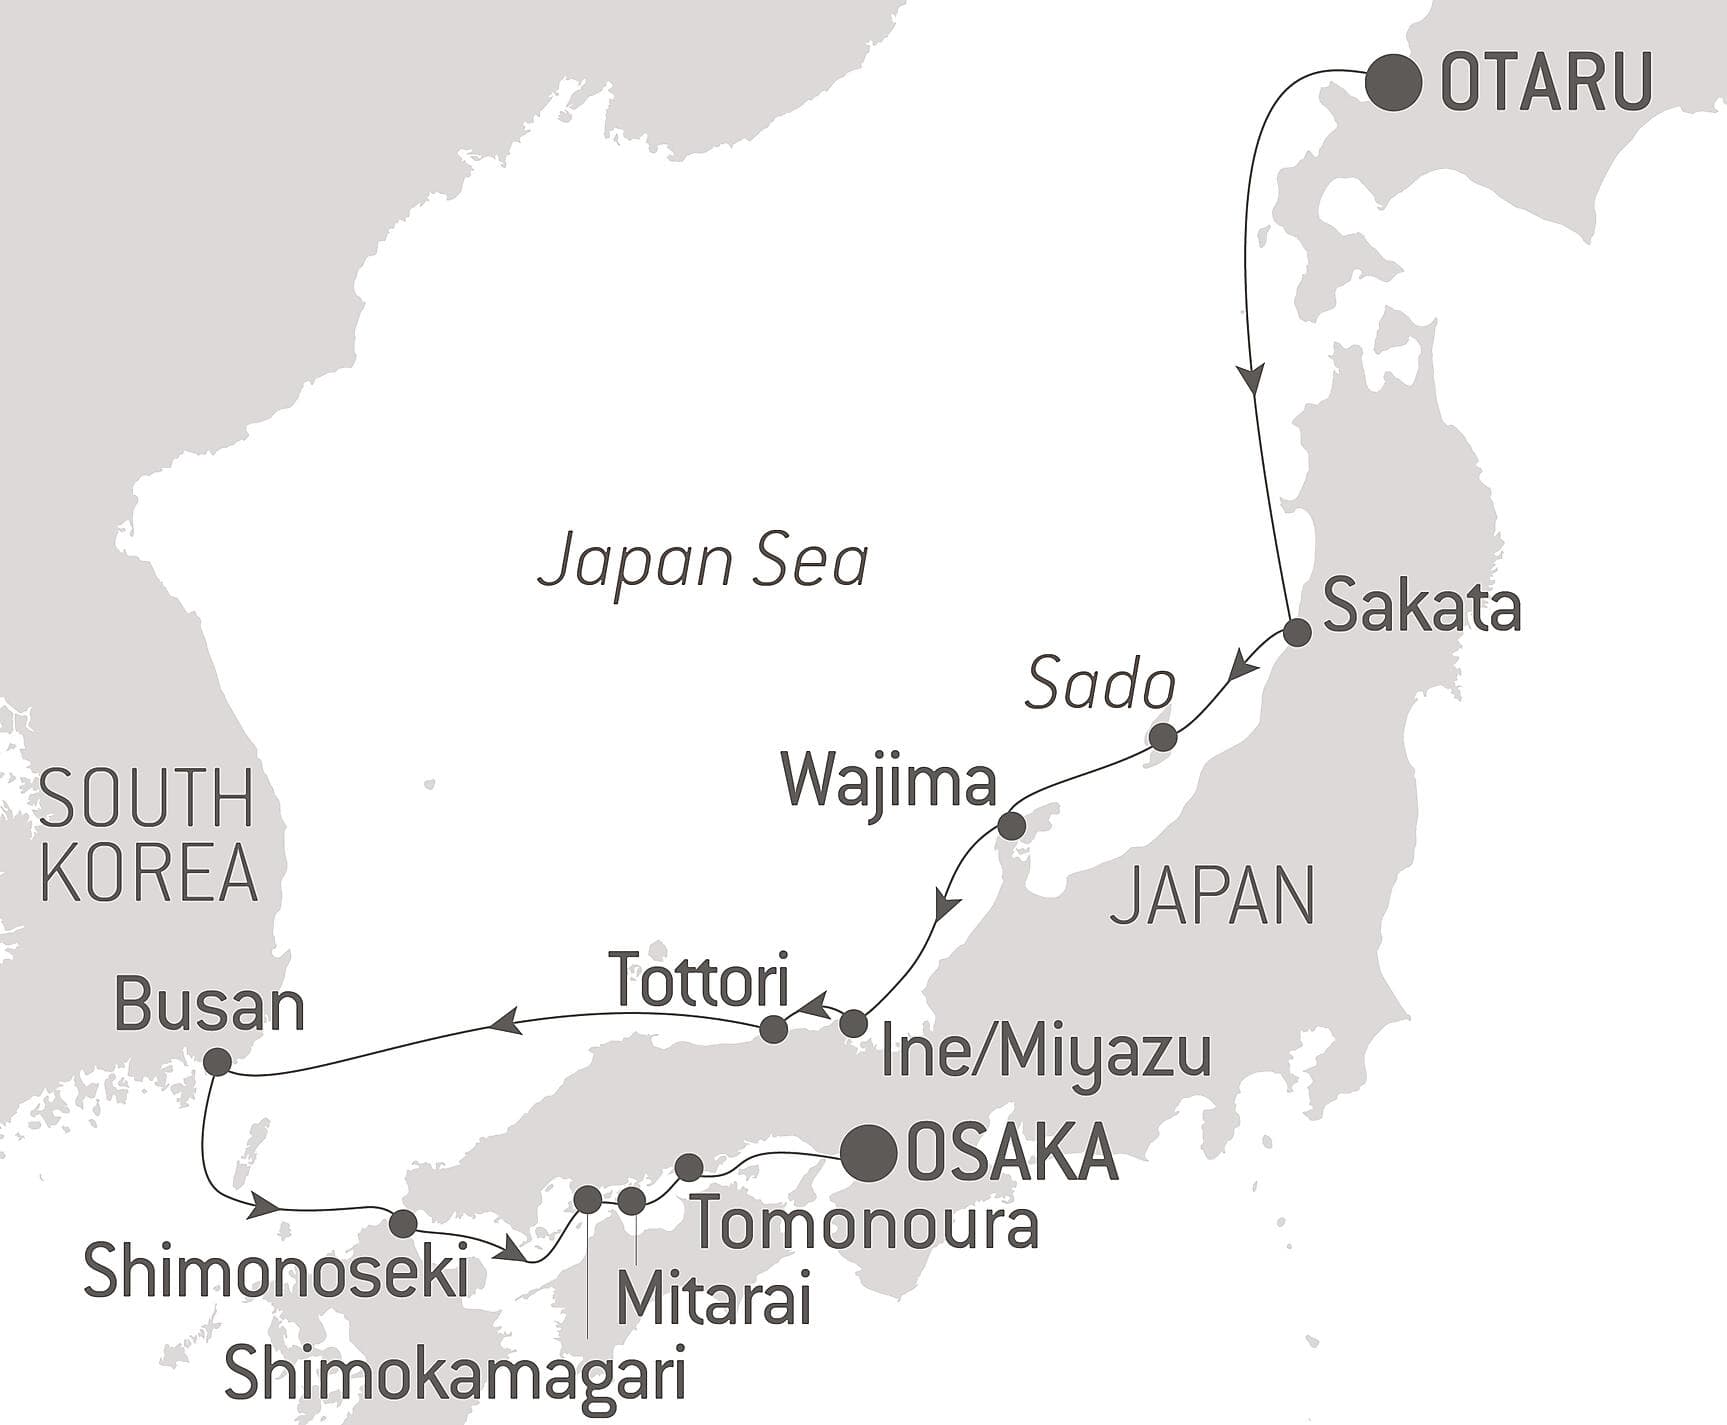 Expedition to the Kitamae route